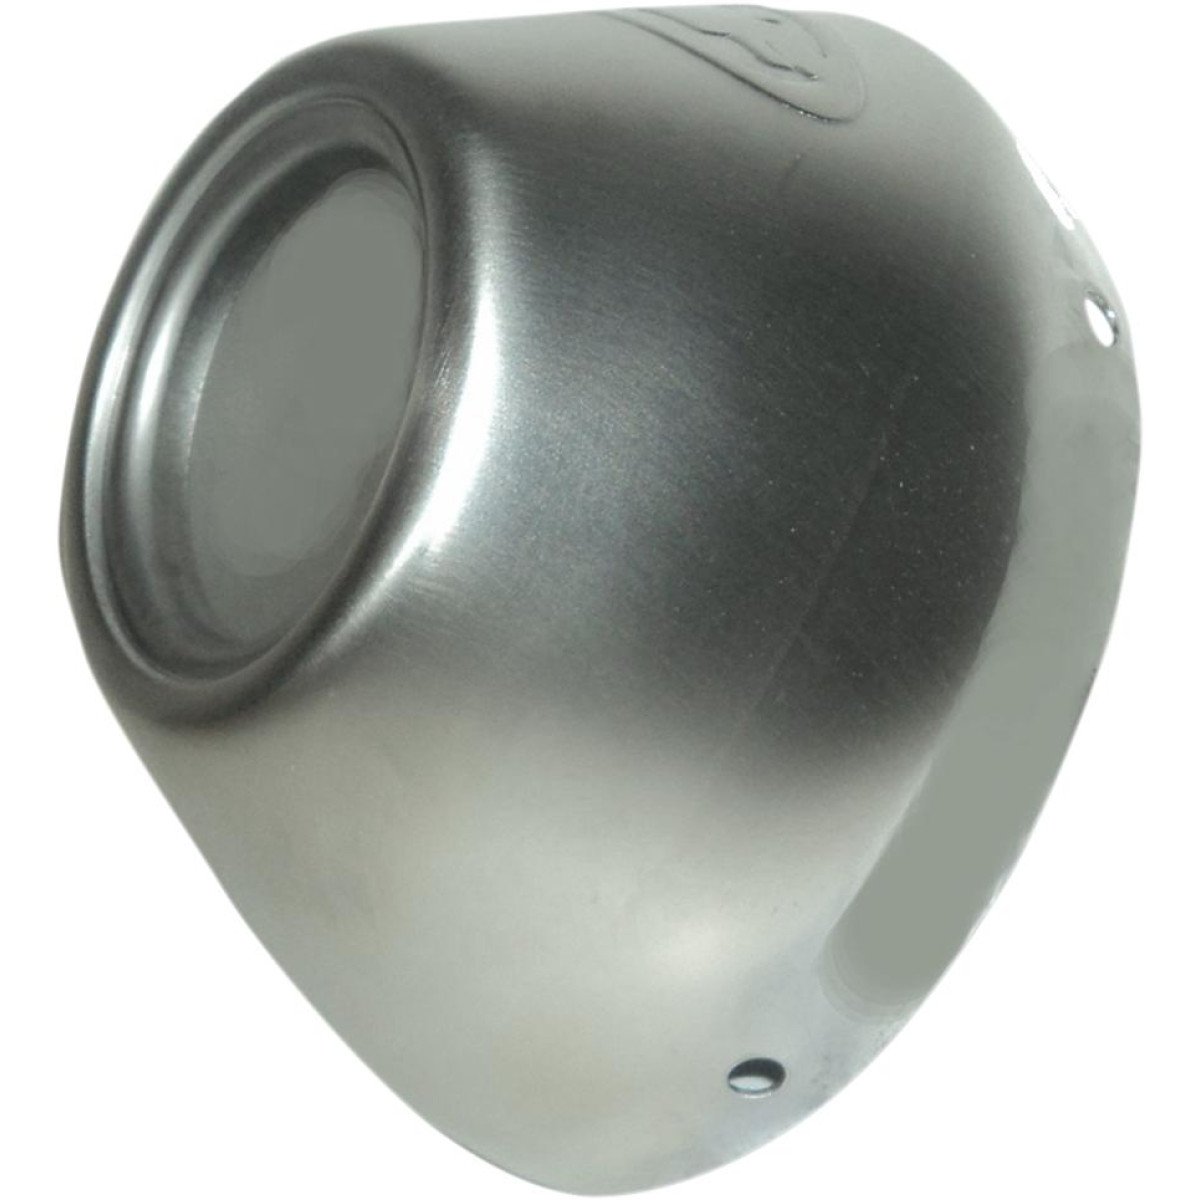 FMF End Cap PowerCore 4 Hex/Q4 Stainless steel